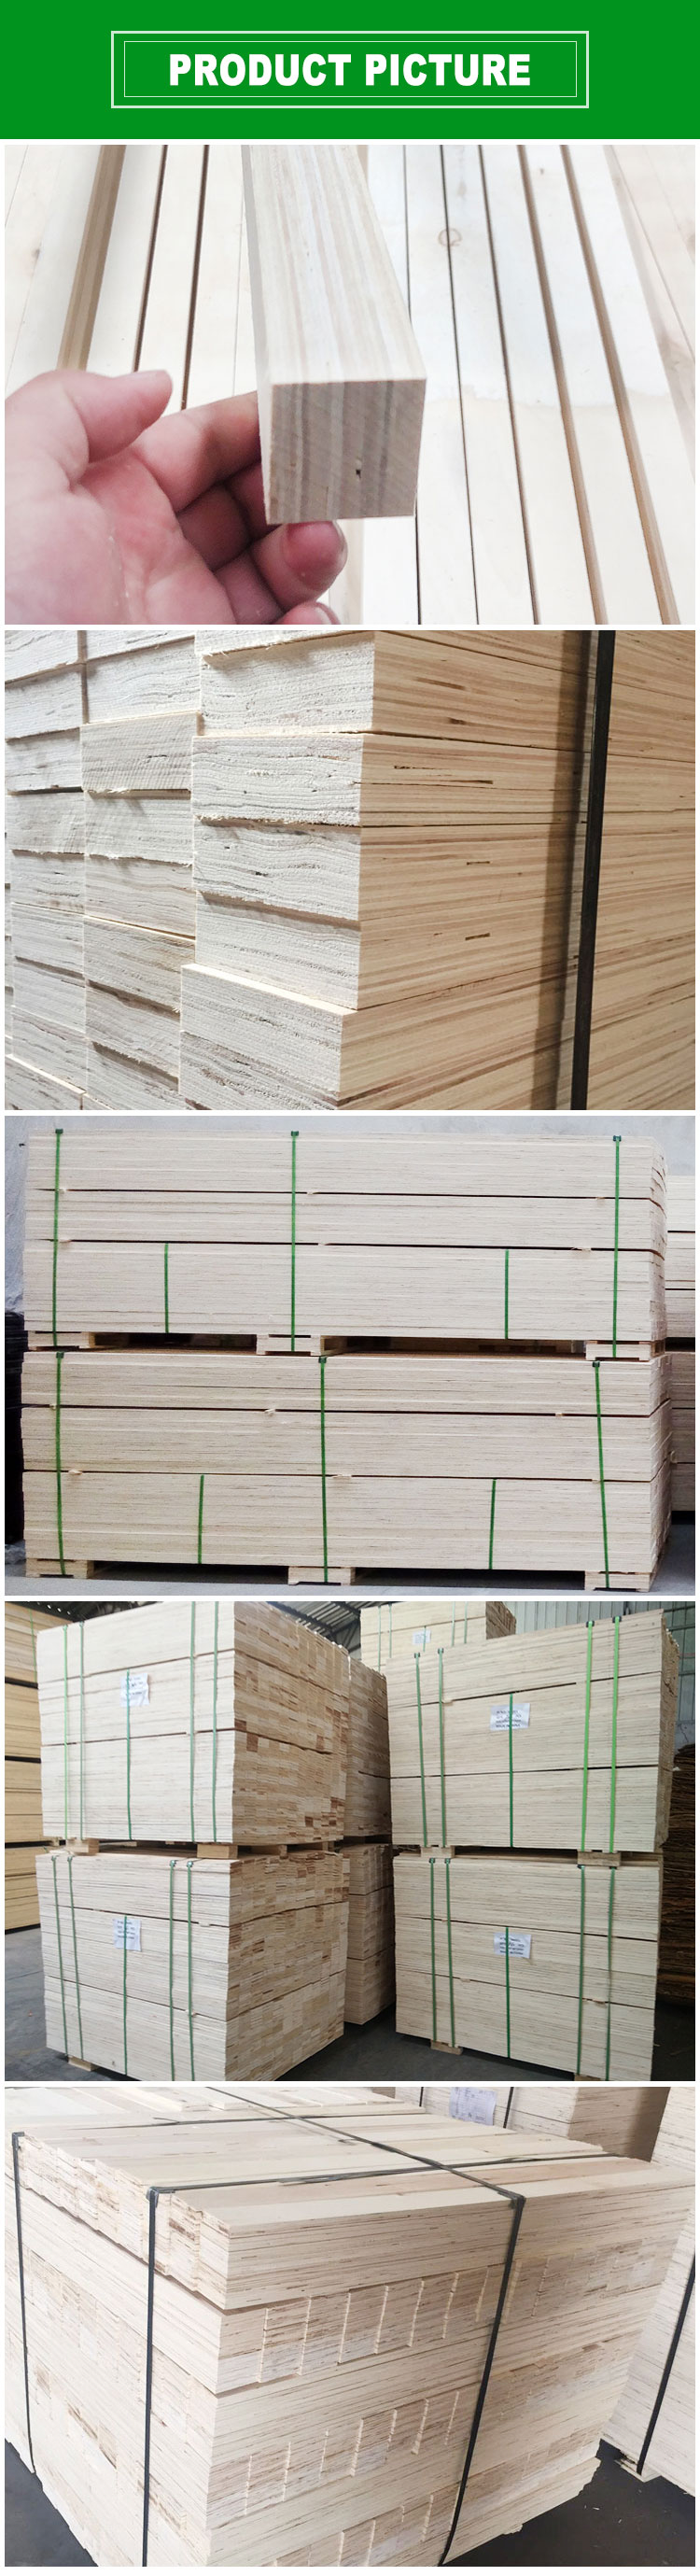 packing grade LVL for wooden pallet(图1)